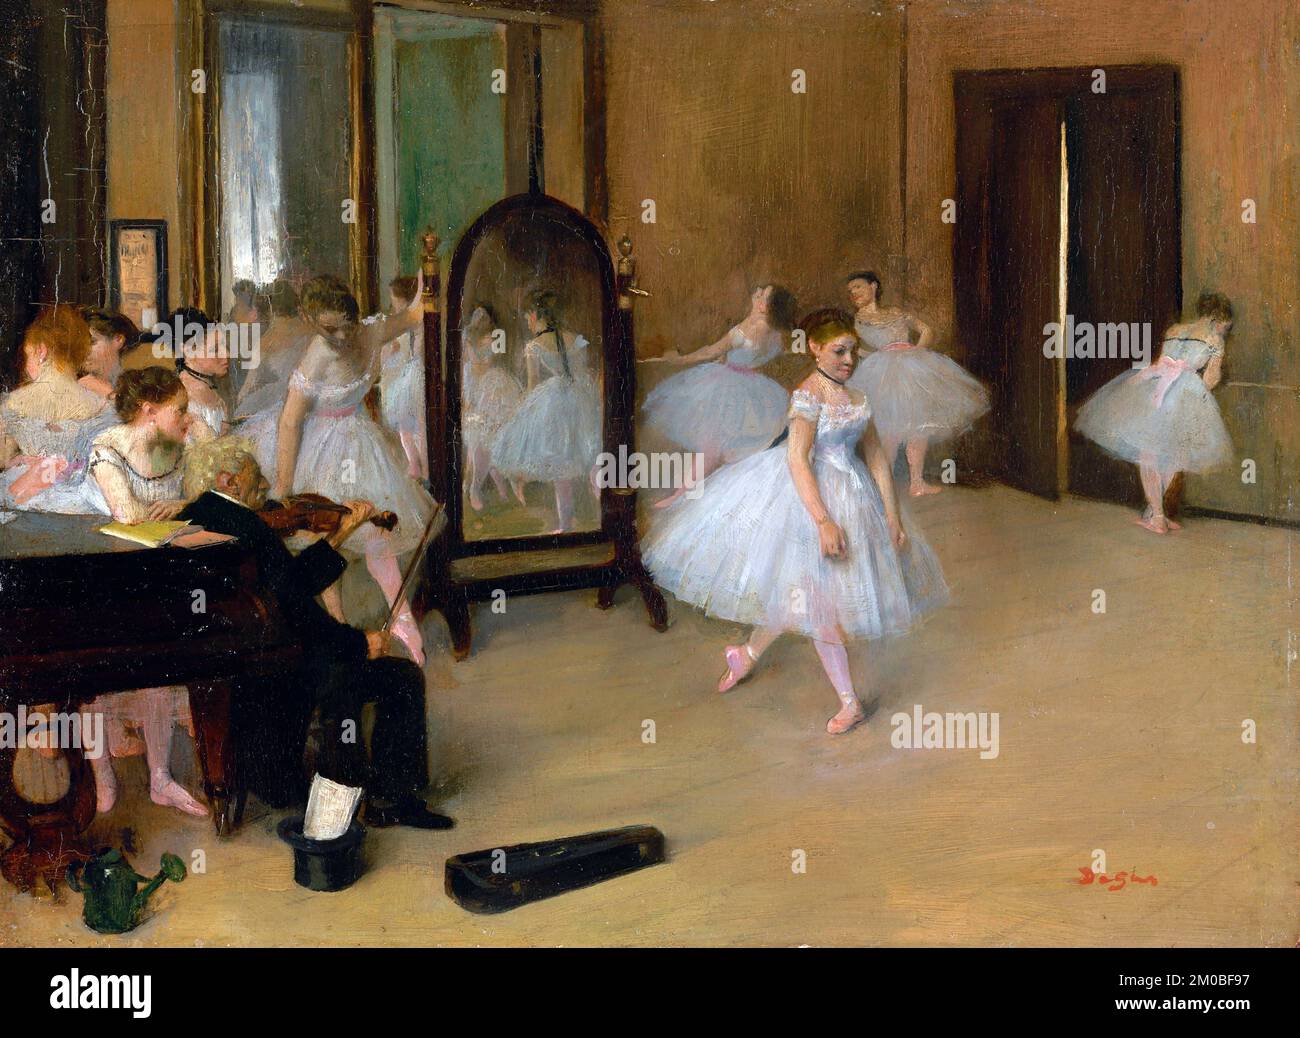 Degas. Painting entitled 'The Dancing Class' by Edgar Degas (1834-1917), oil on panel, c. 1870 Stock Photo